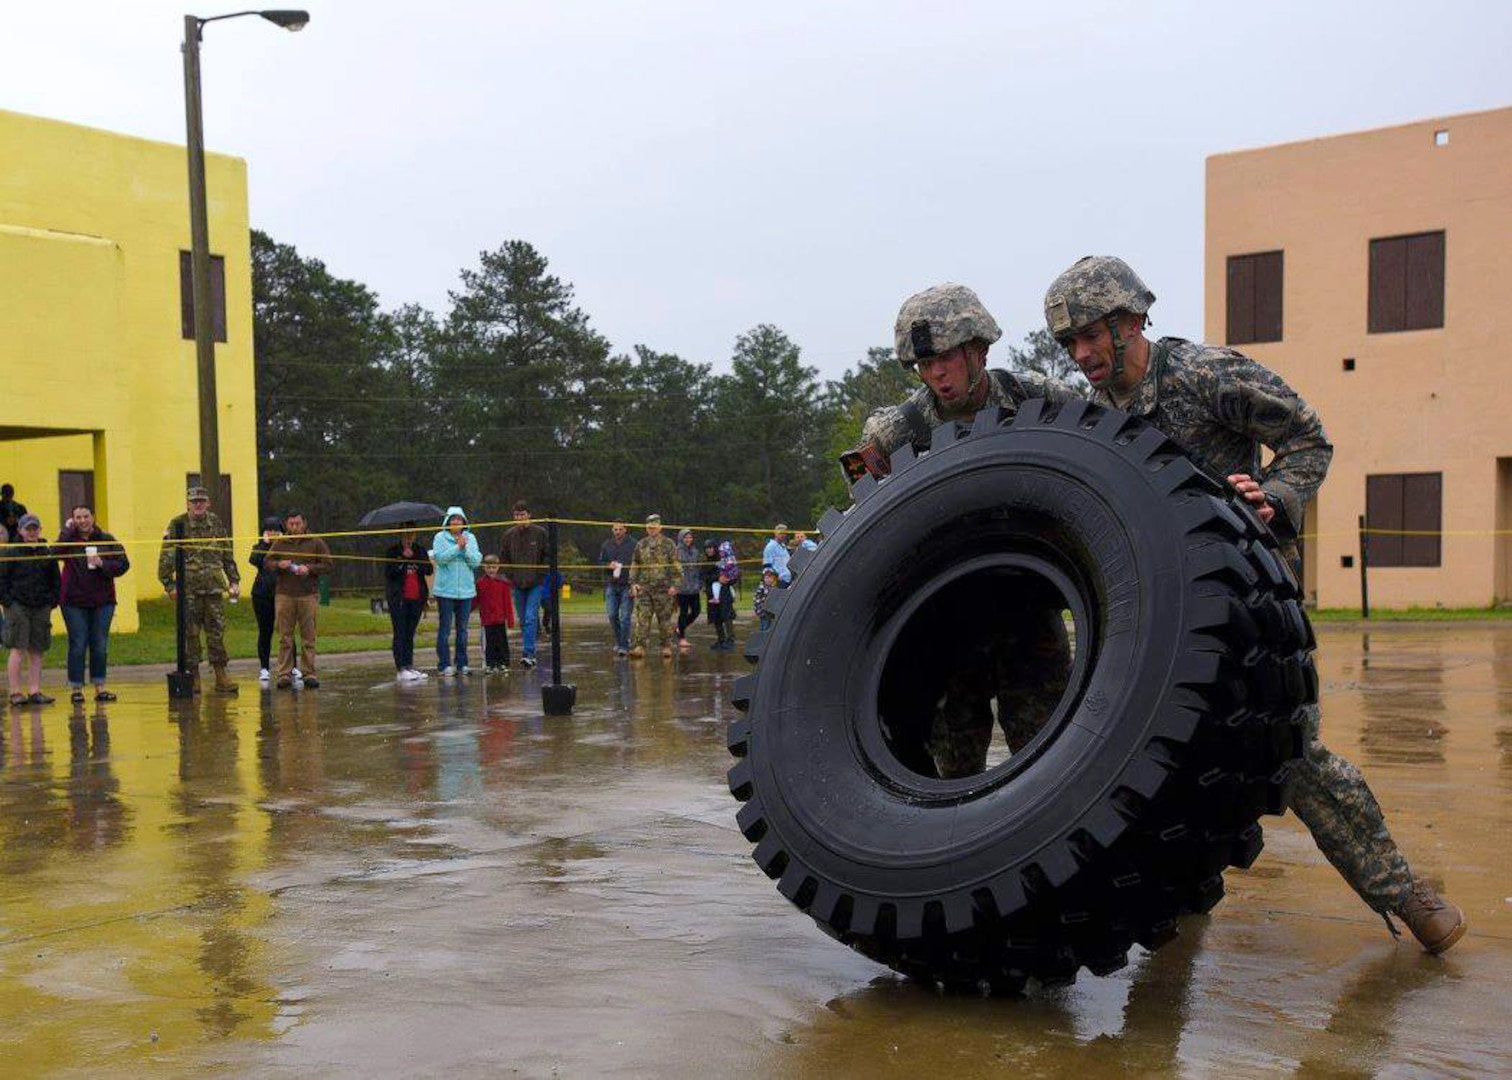 Army Staff Sgt. Erich Friedlein, left, with the Pennsylvania Army National Guard, and his teammate, Army Capt. Robert Killian, with the Colorado Army National Guard, work together to move a large truck tire while competing in the 2016 Lt. Gen. David E. Grange Jr. Best Ranger Competition at Fort Benning, Georgia. The two took first place in the grueling three-day competition that tests competitors on a variety of tactical and technical tasks in a physically and mentally demanding environment, marking the first time an Army Guard team has won in the competition’s 33-year history. 